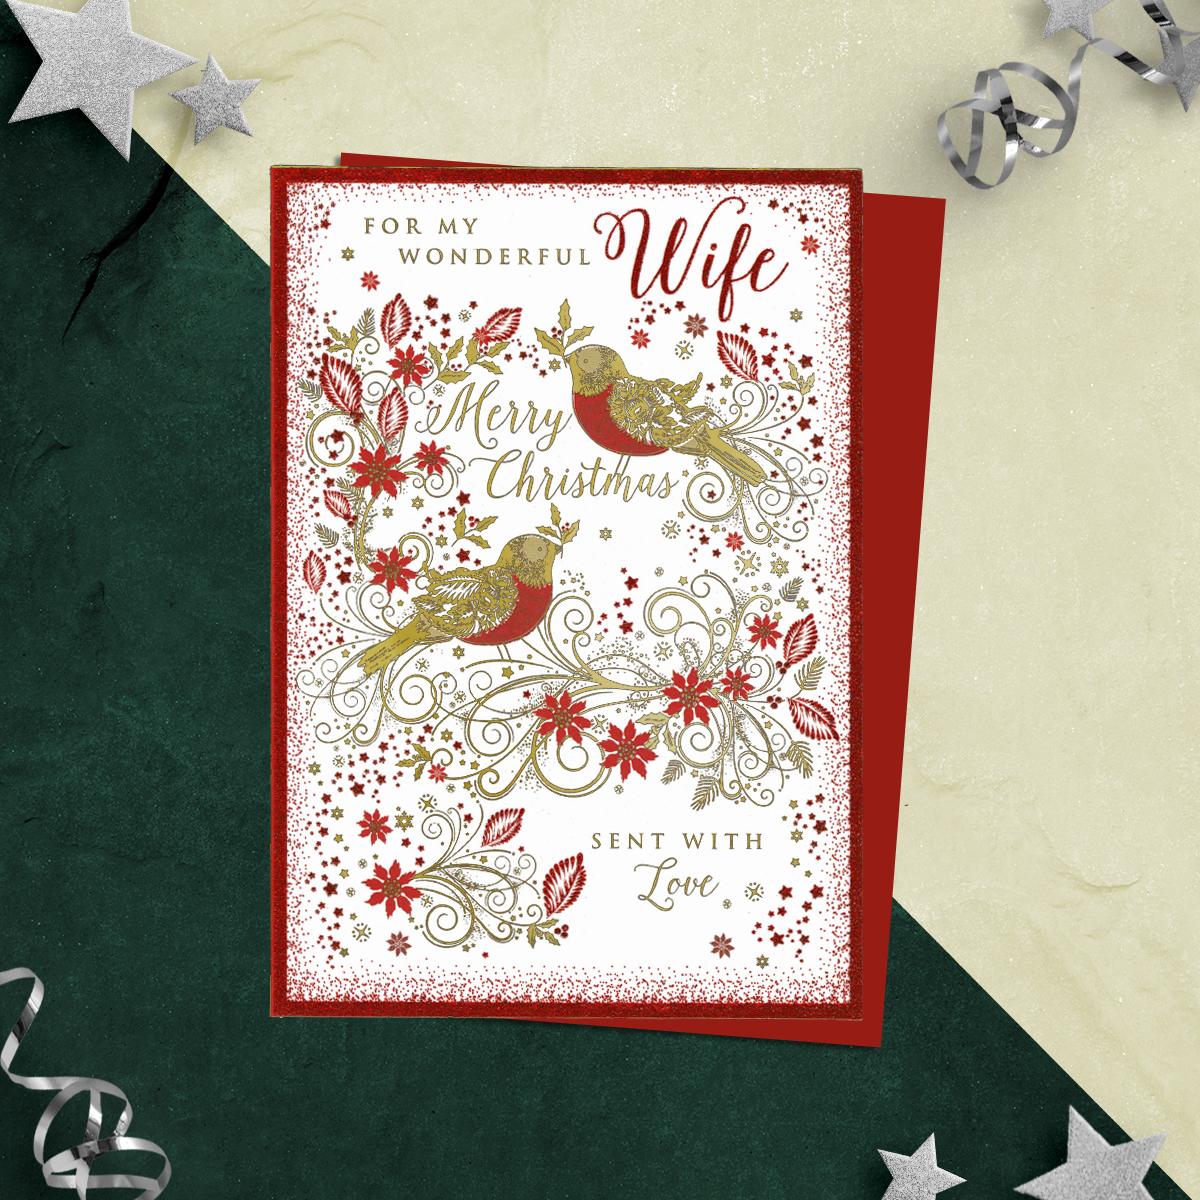 For My Wonderful Wife Merry Christmas Sent With Love Featuring Beautiful Red and Gold Robins Among Branches And Leaves. Finished With Beautiful Gold And Red Foiling And Glitter. Complete With Red Envelope And Heartfelt Verse